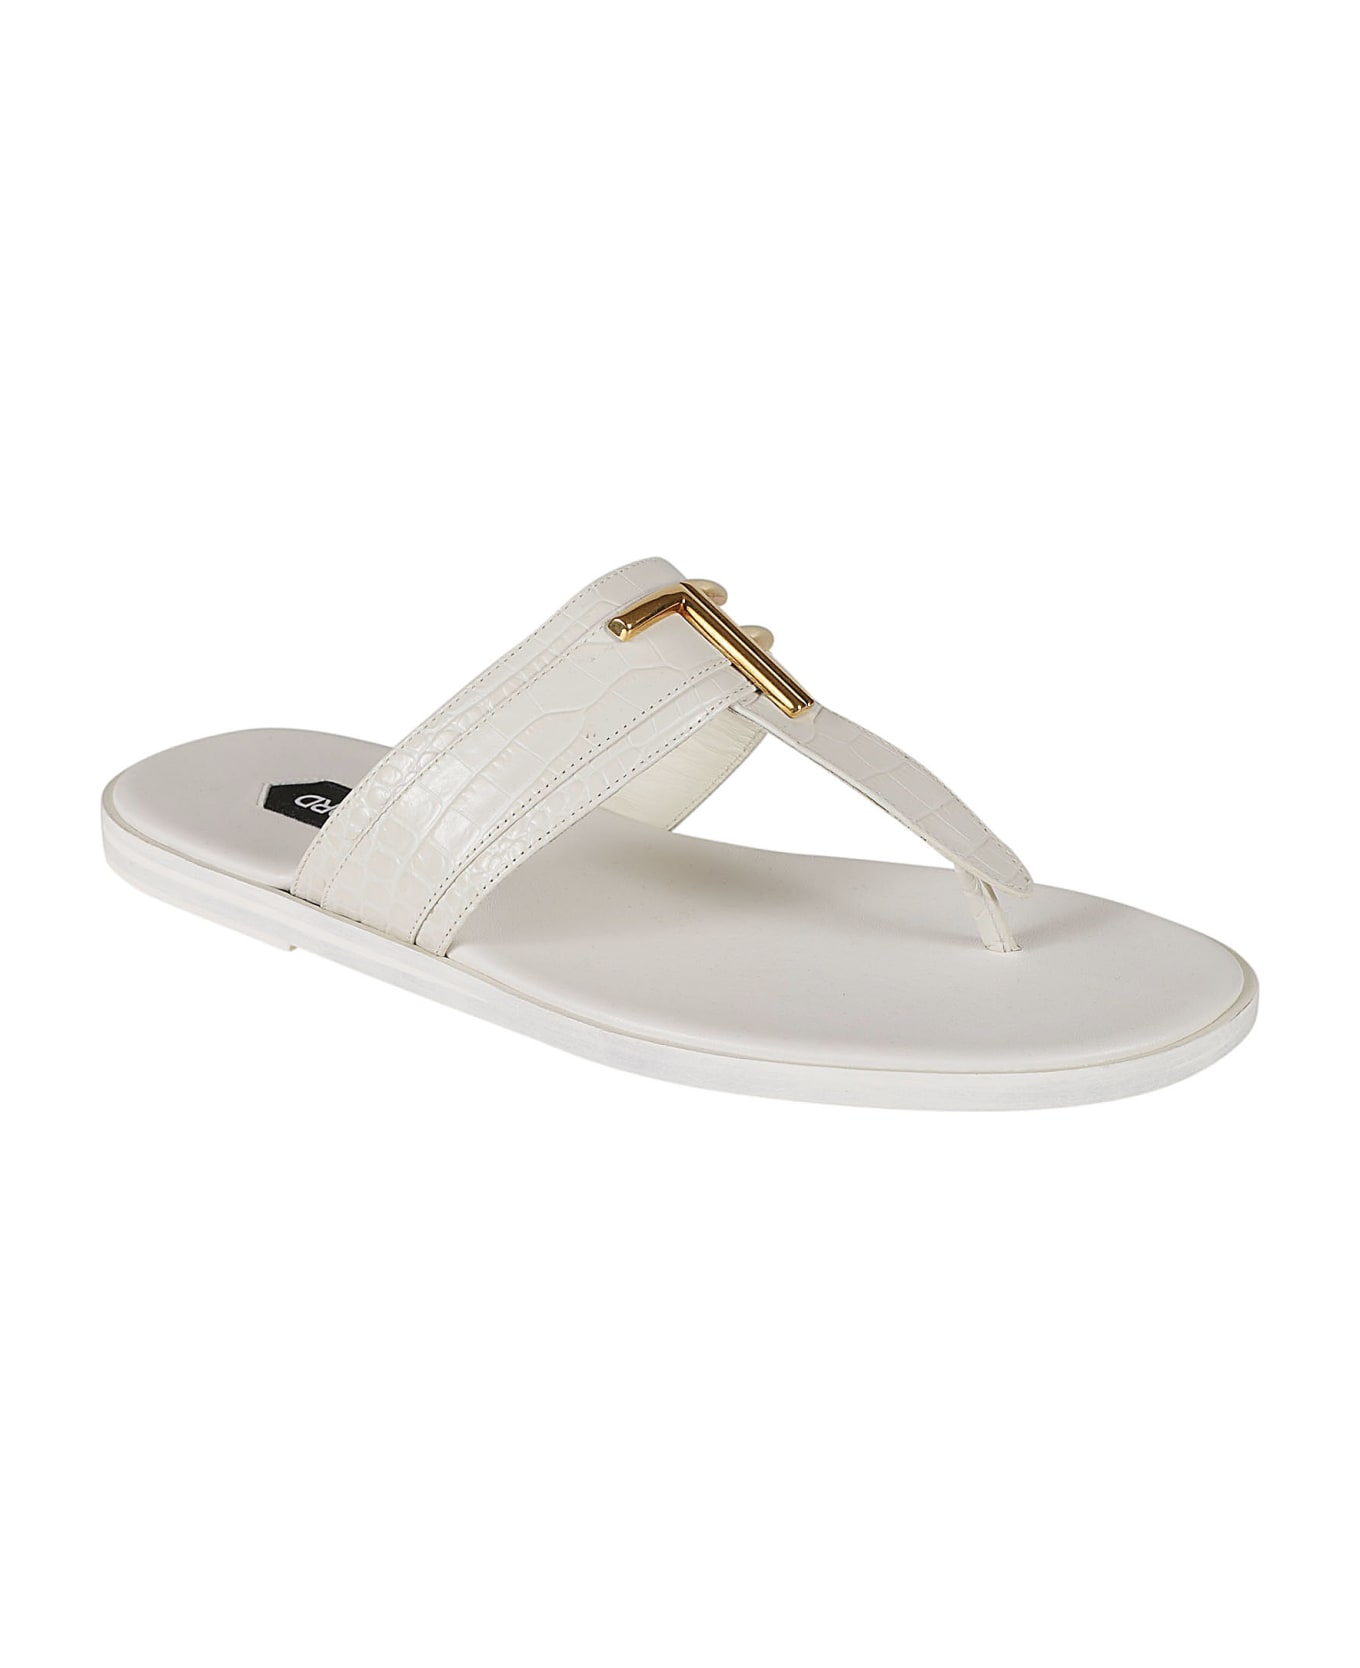 Tom Ford T Plaque Flat Sandals - Porcelain その他各種シューズ